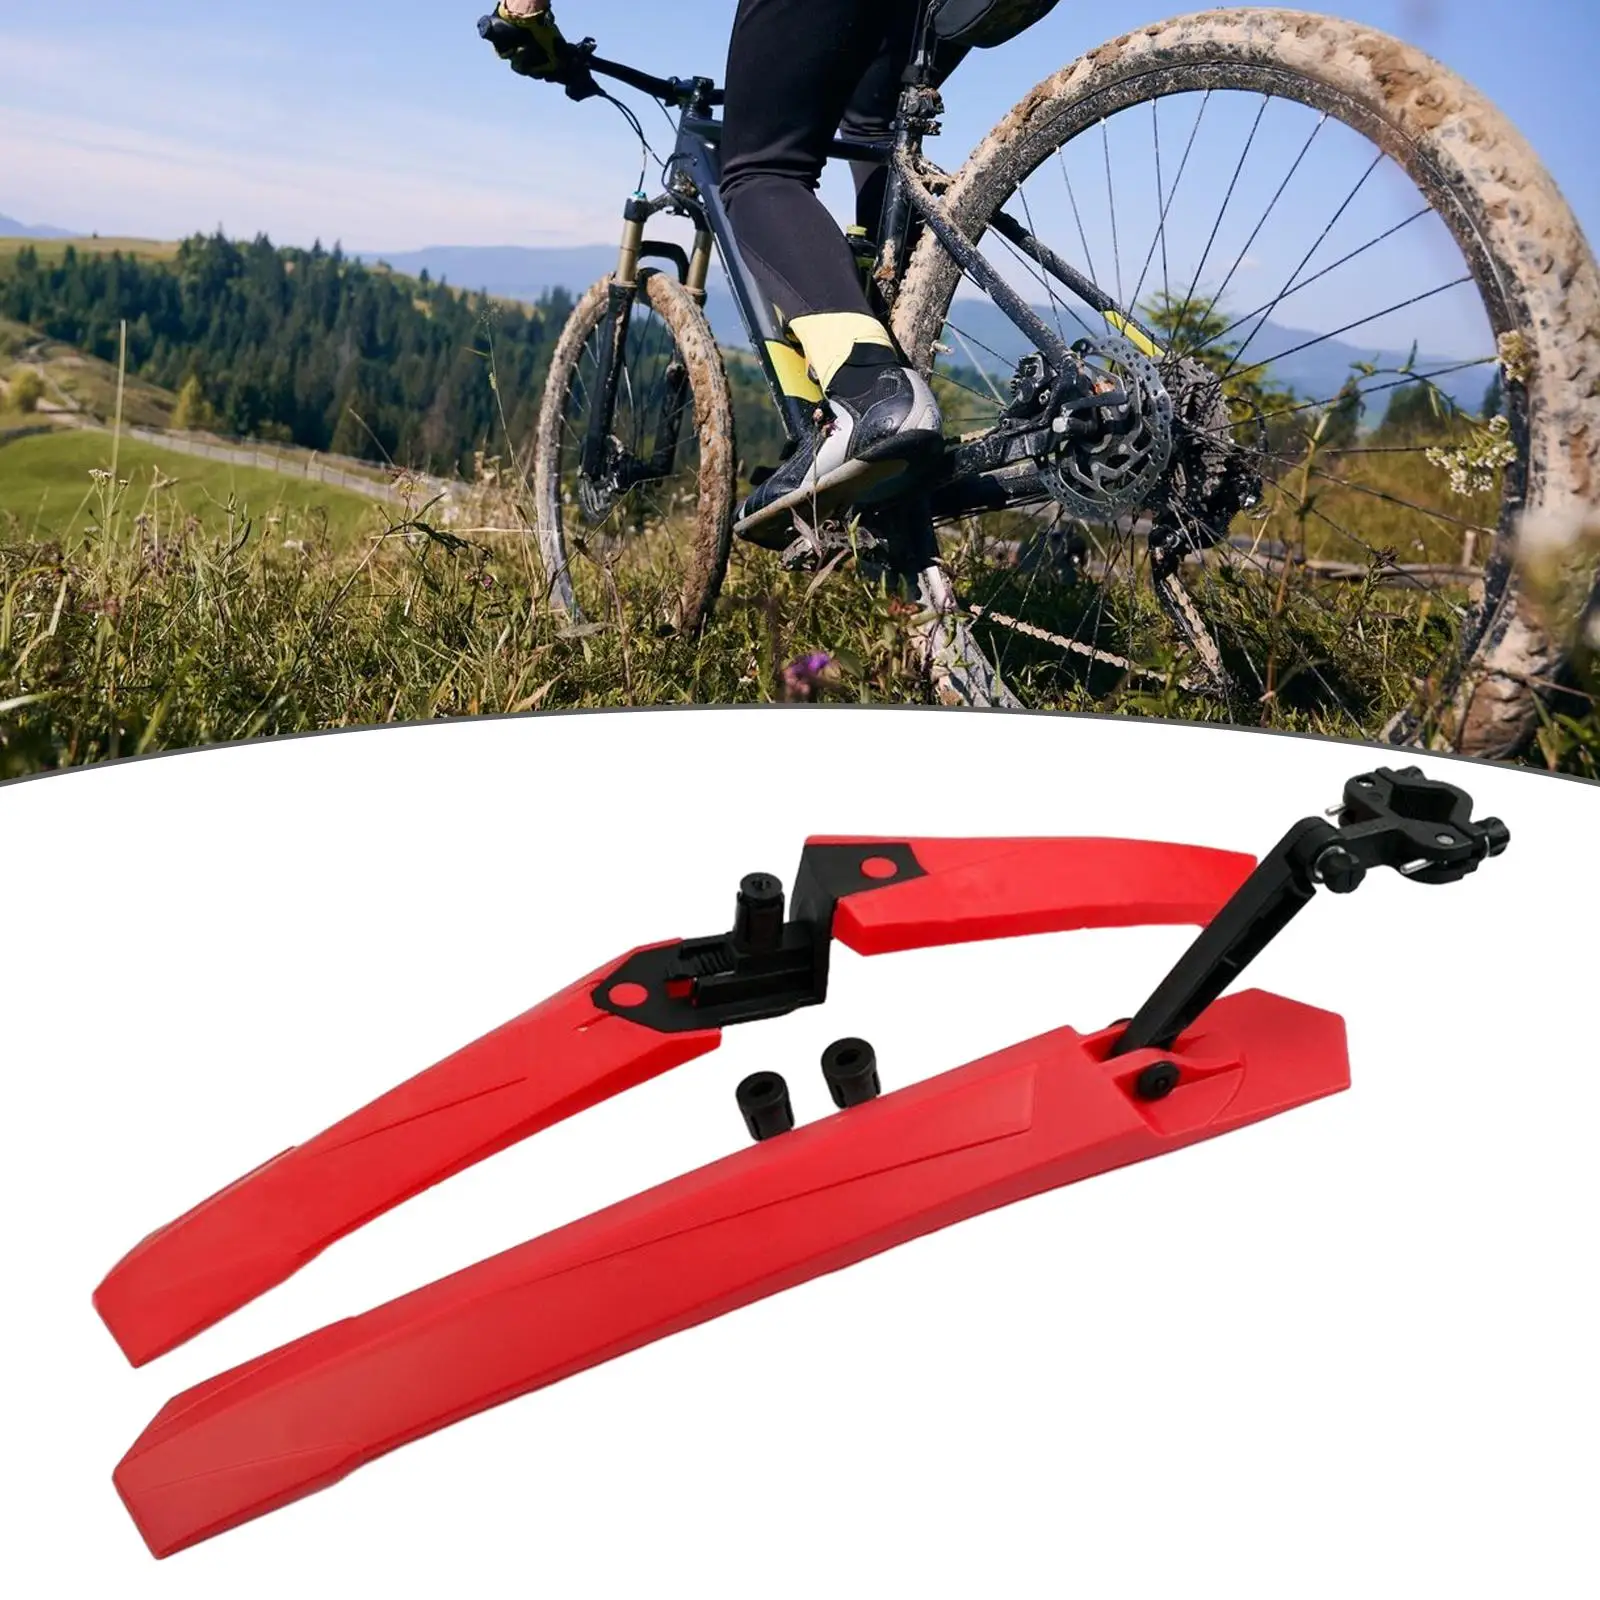 Bike Mudguard Front Rear Set Bicycle Mud Guard Easy to Install Durable Bike Front & Rear Fenders for Riding Repair Parts Accs